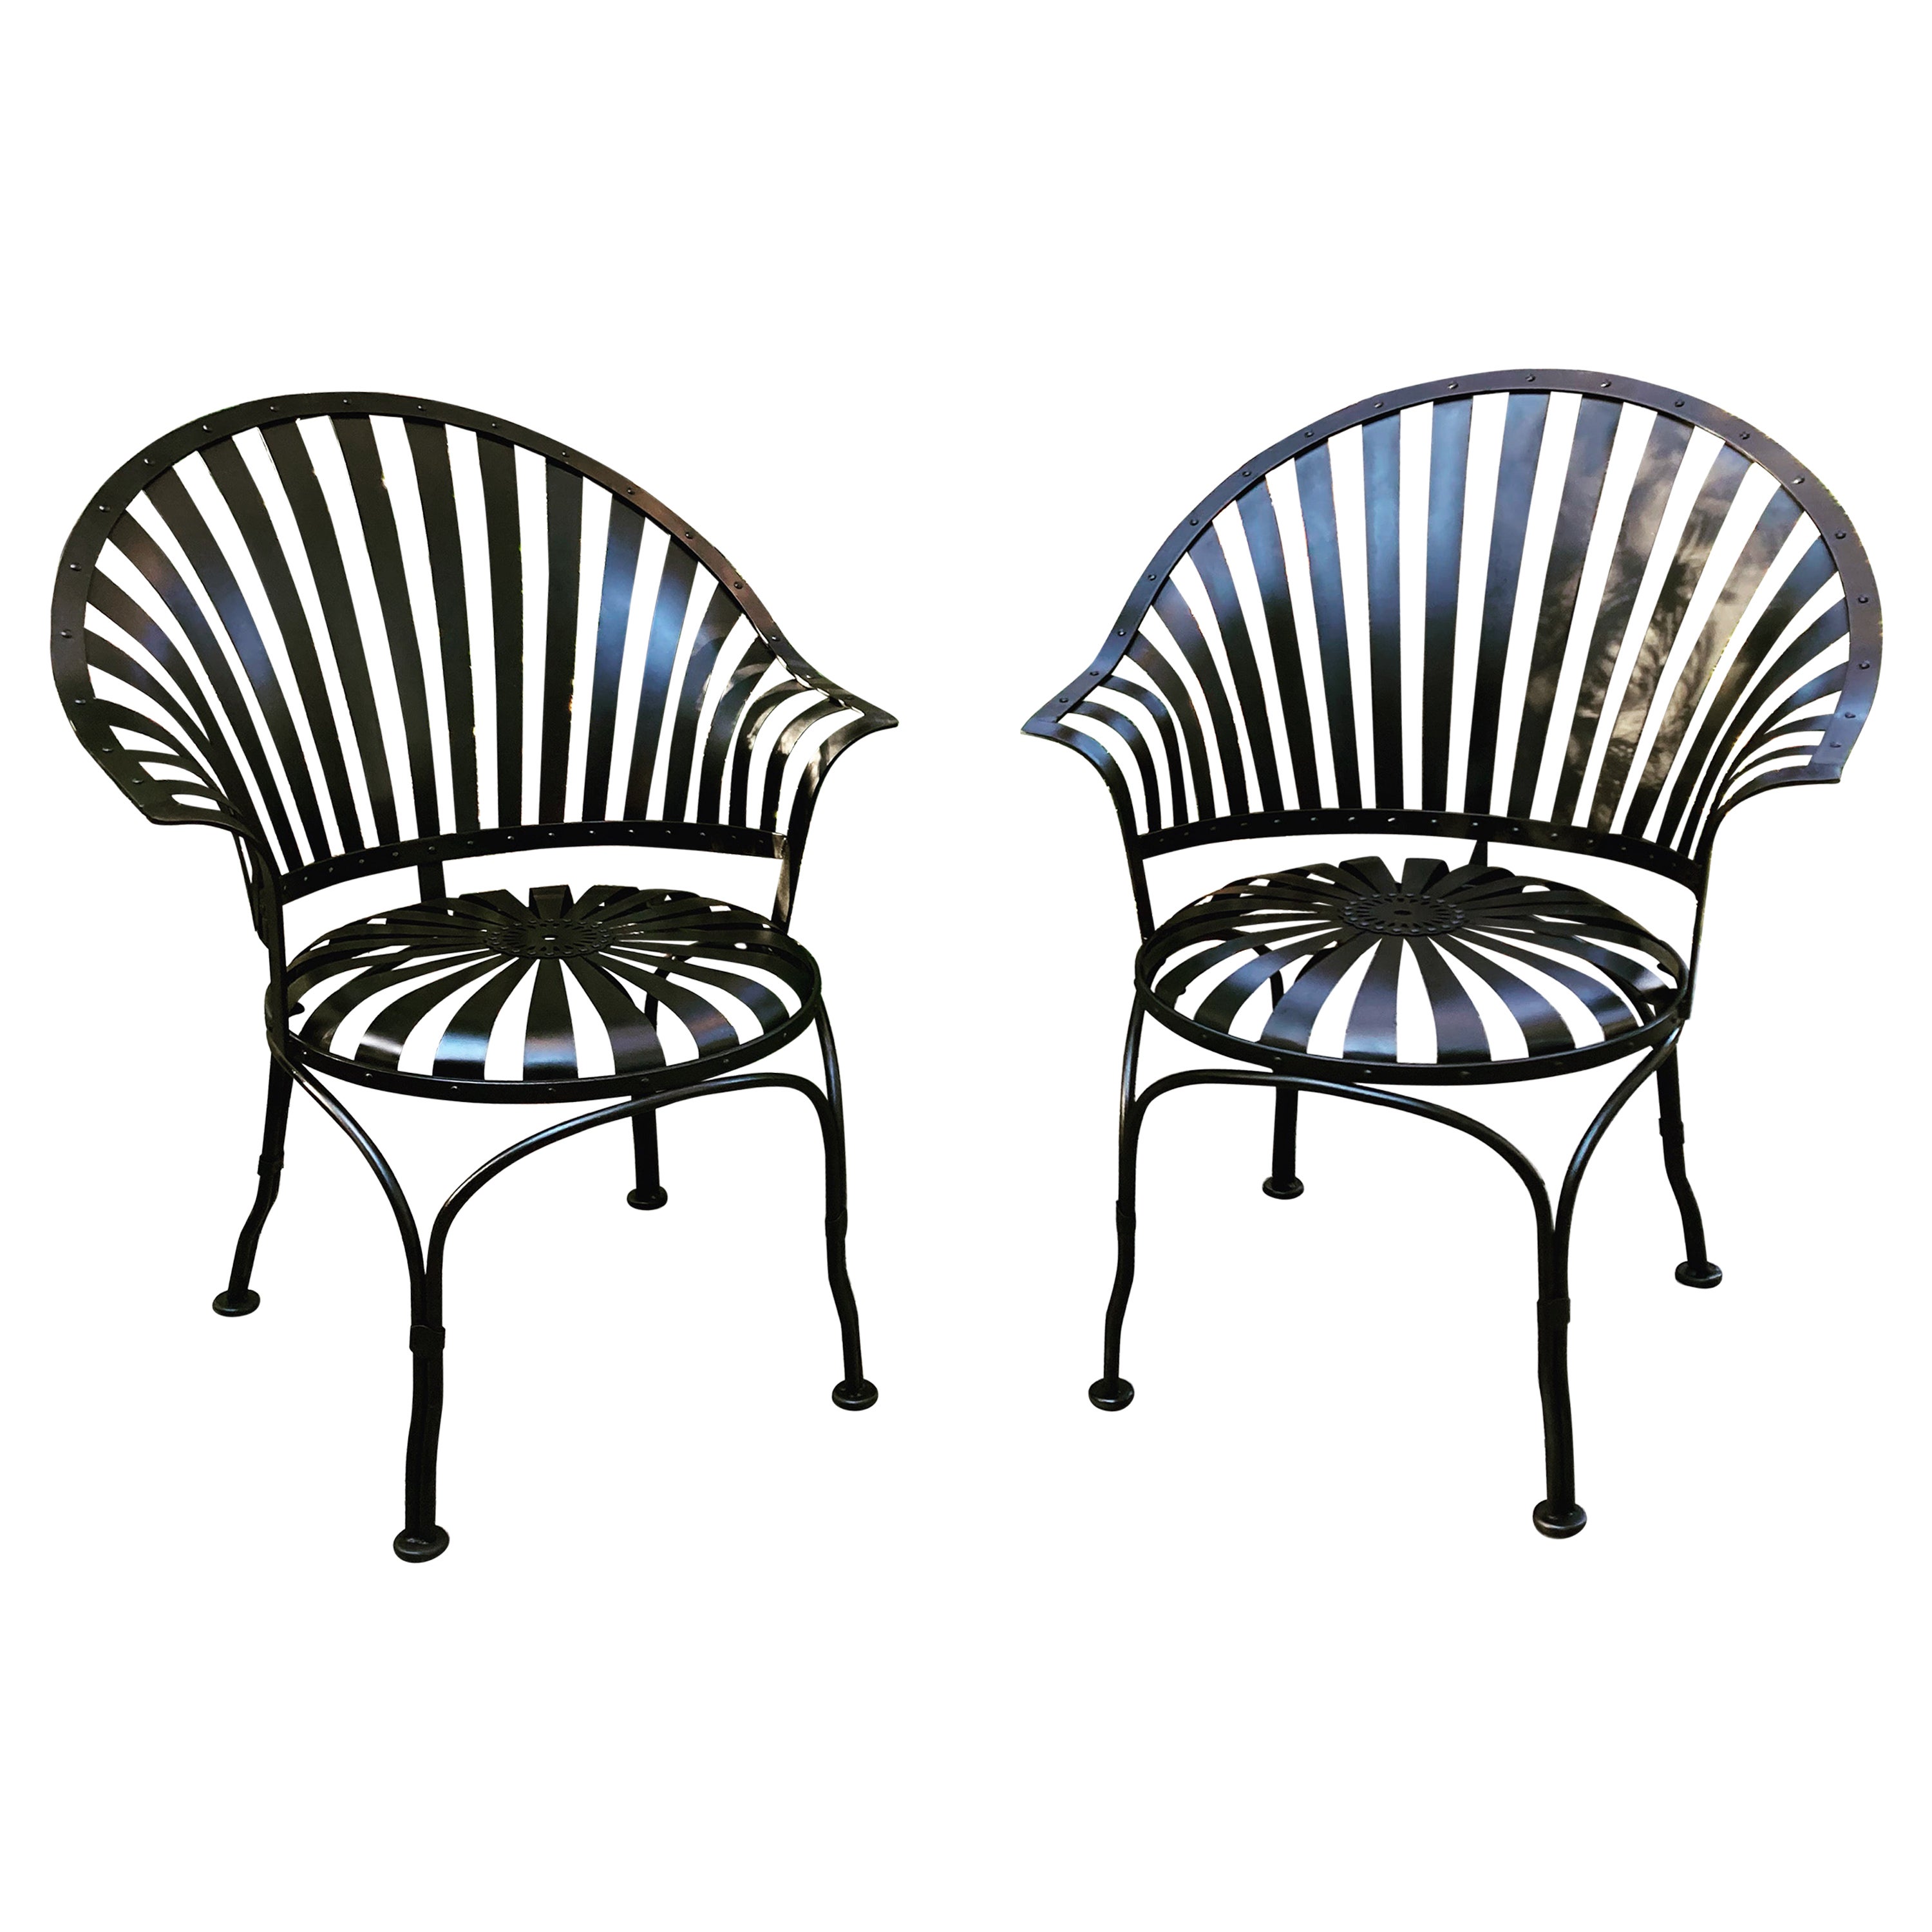 francois carre fan-back iron garden chairs - a pair For Sale